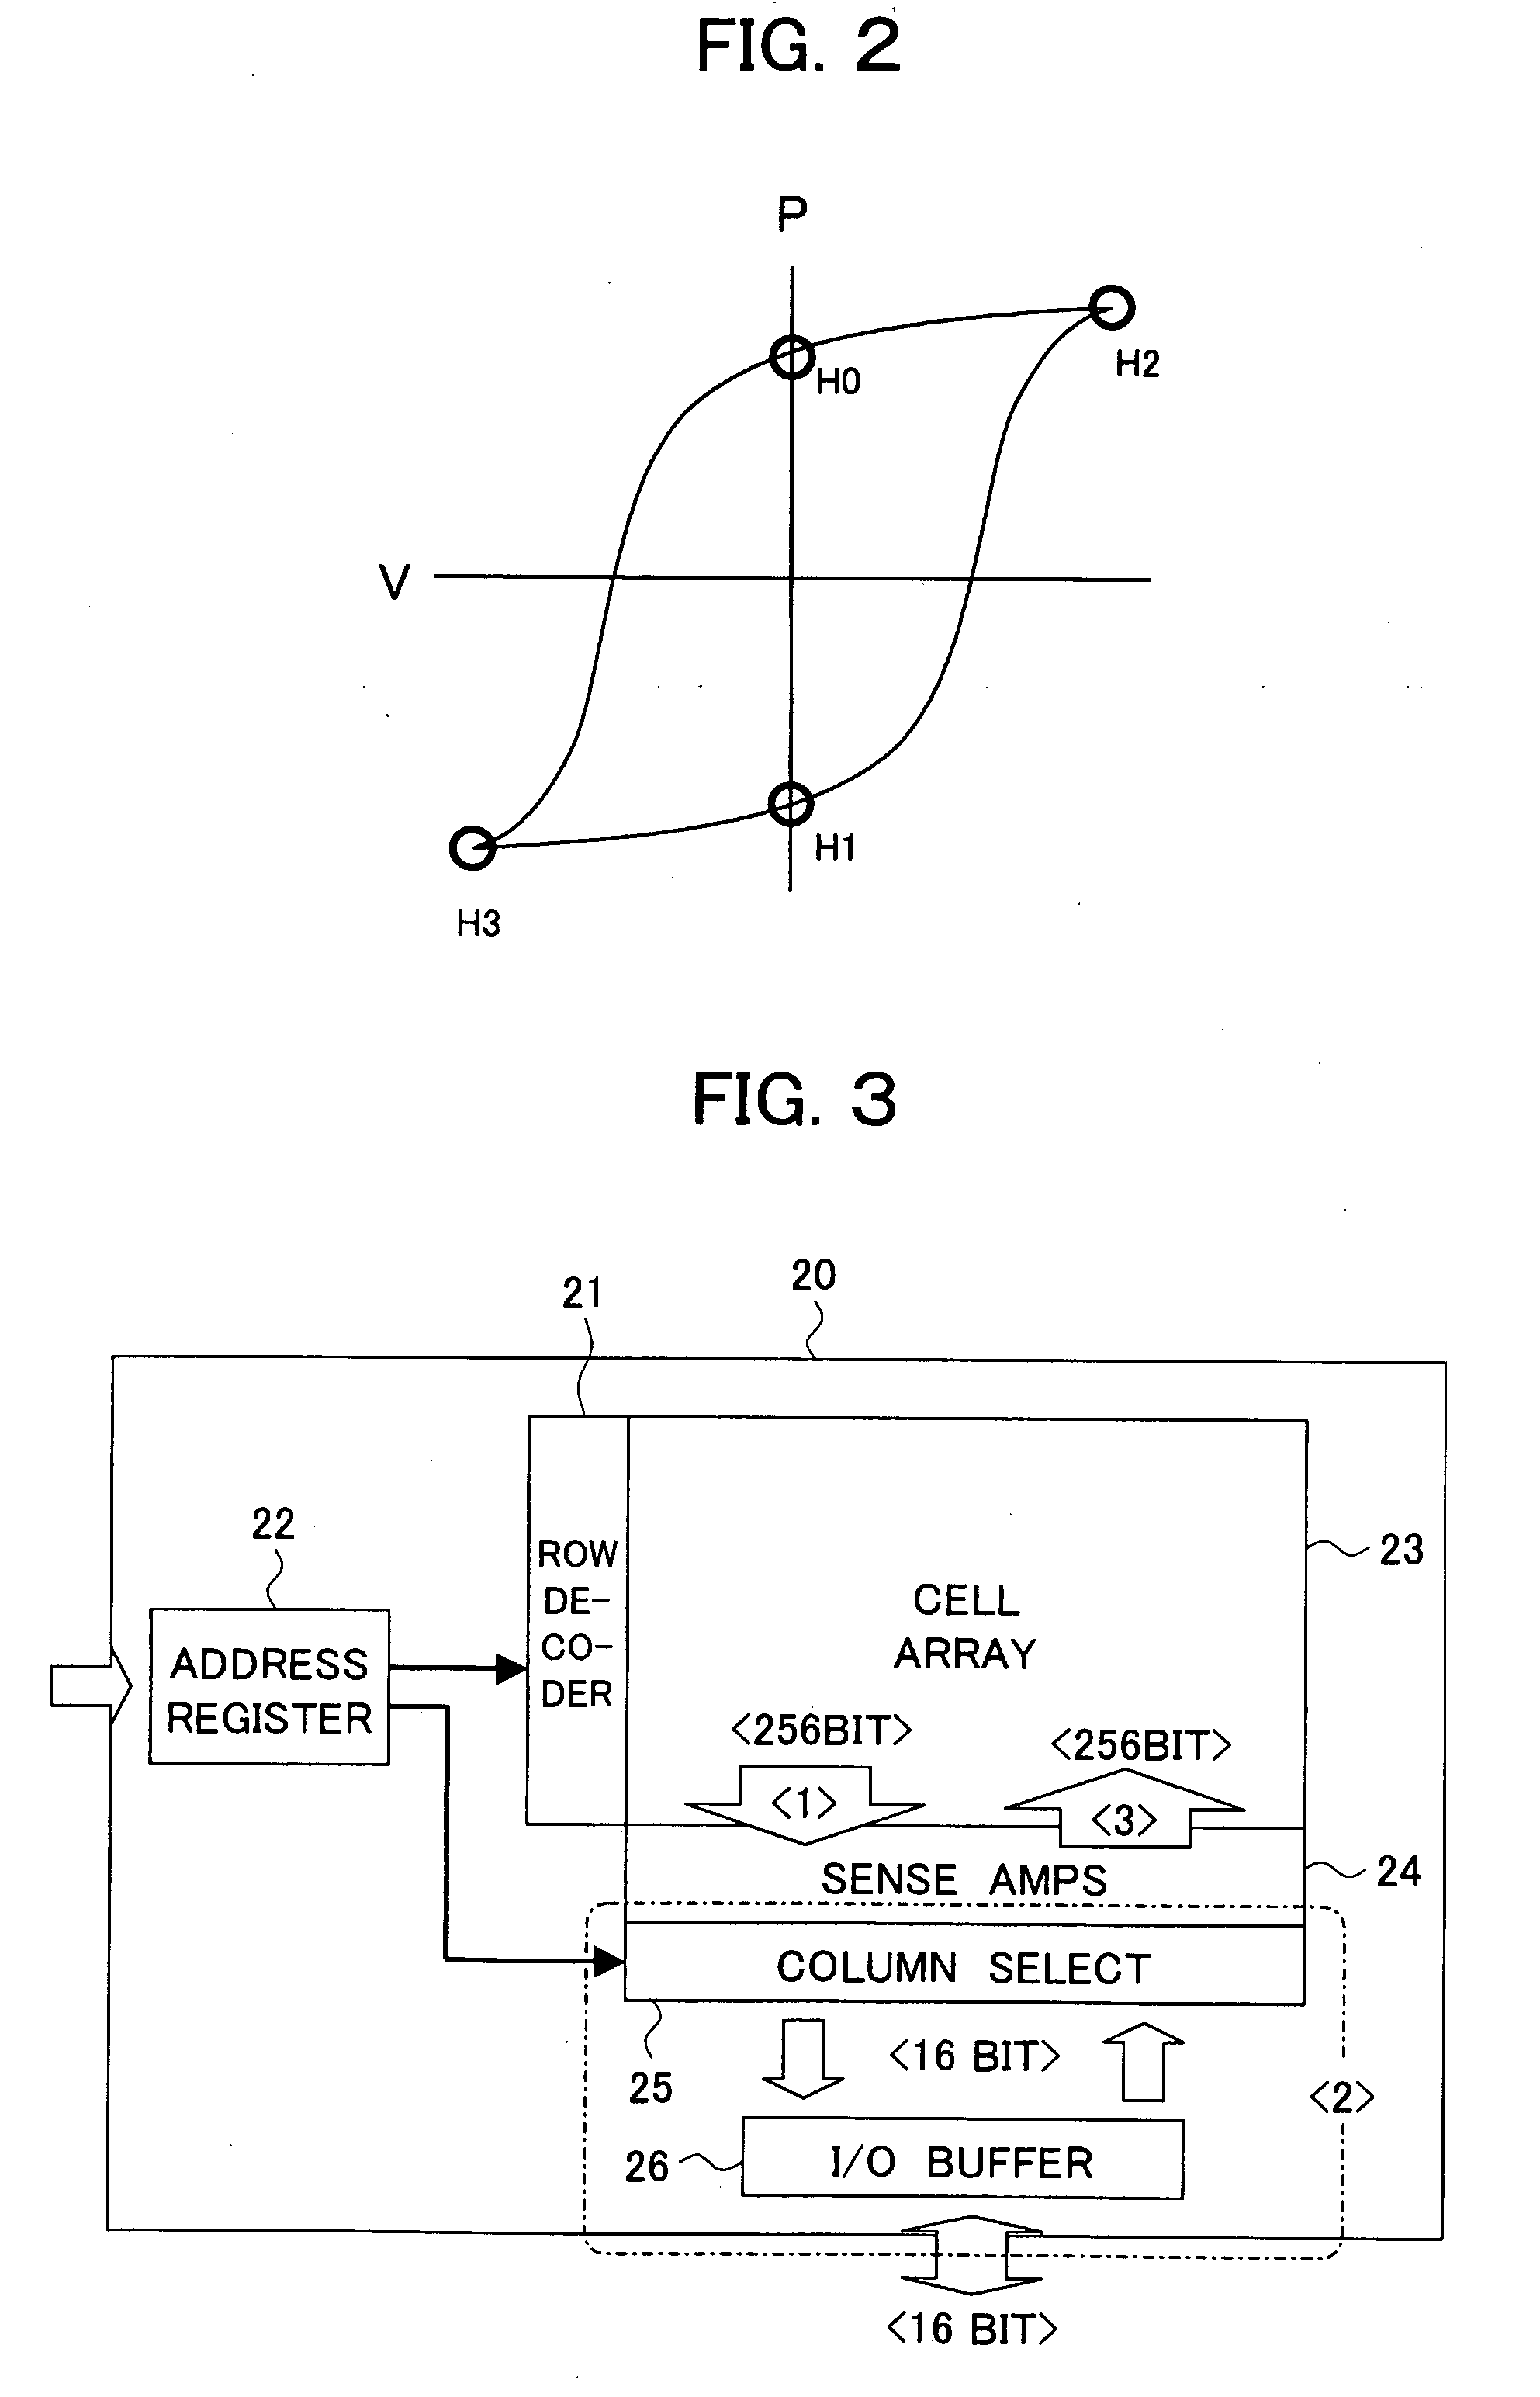 Storage device, file storage device, and computer system